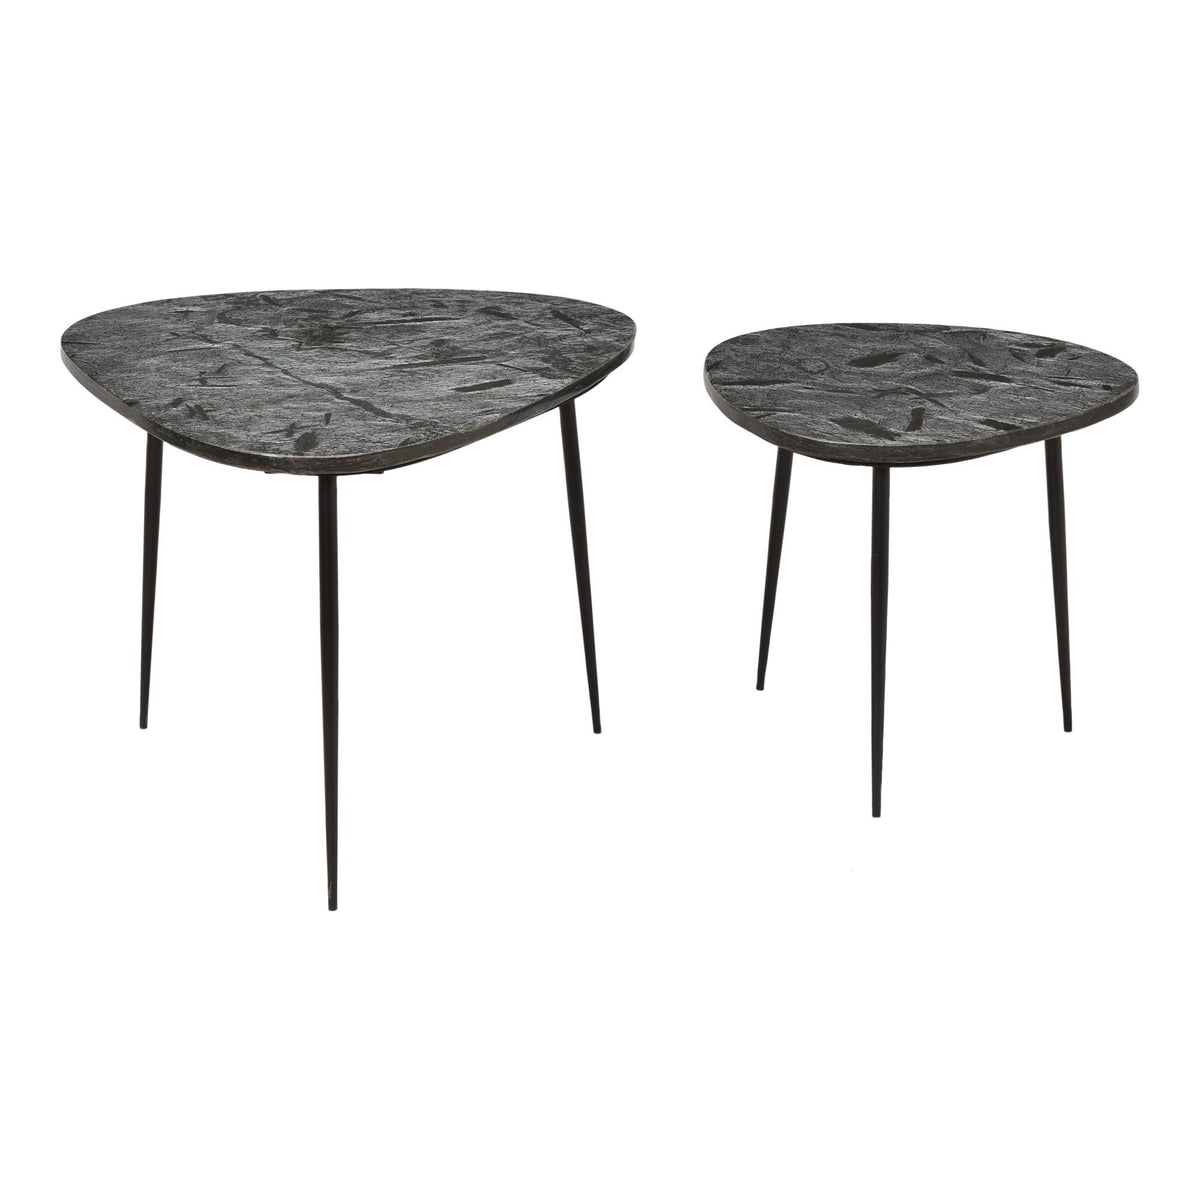 Moe's Home Collection Rigby Nesting Tables - IK-1023-02